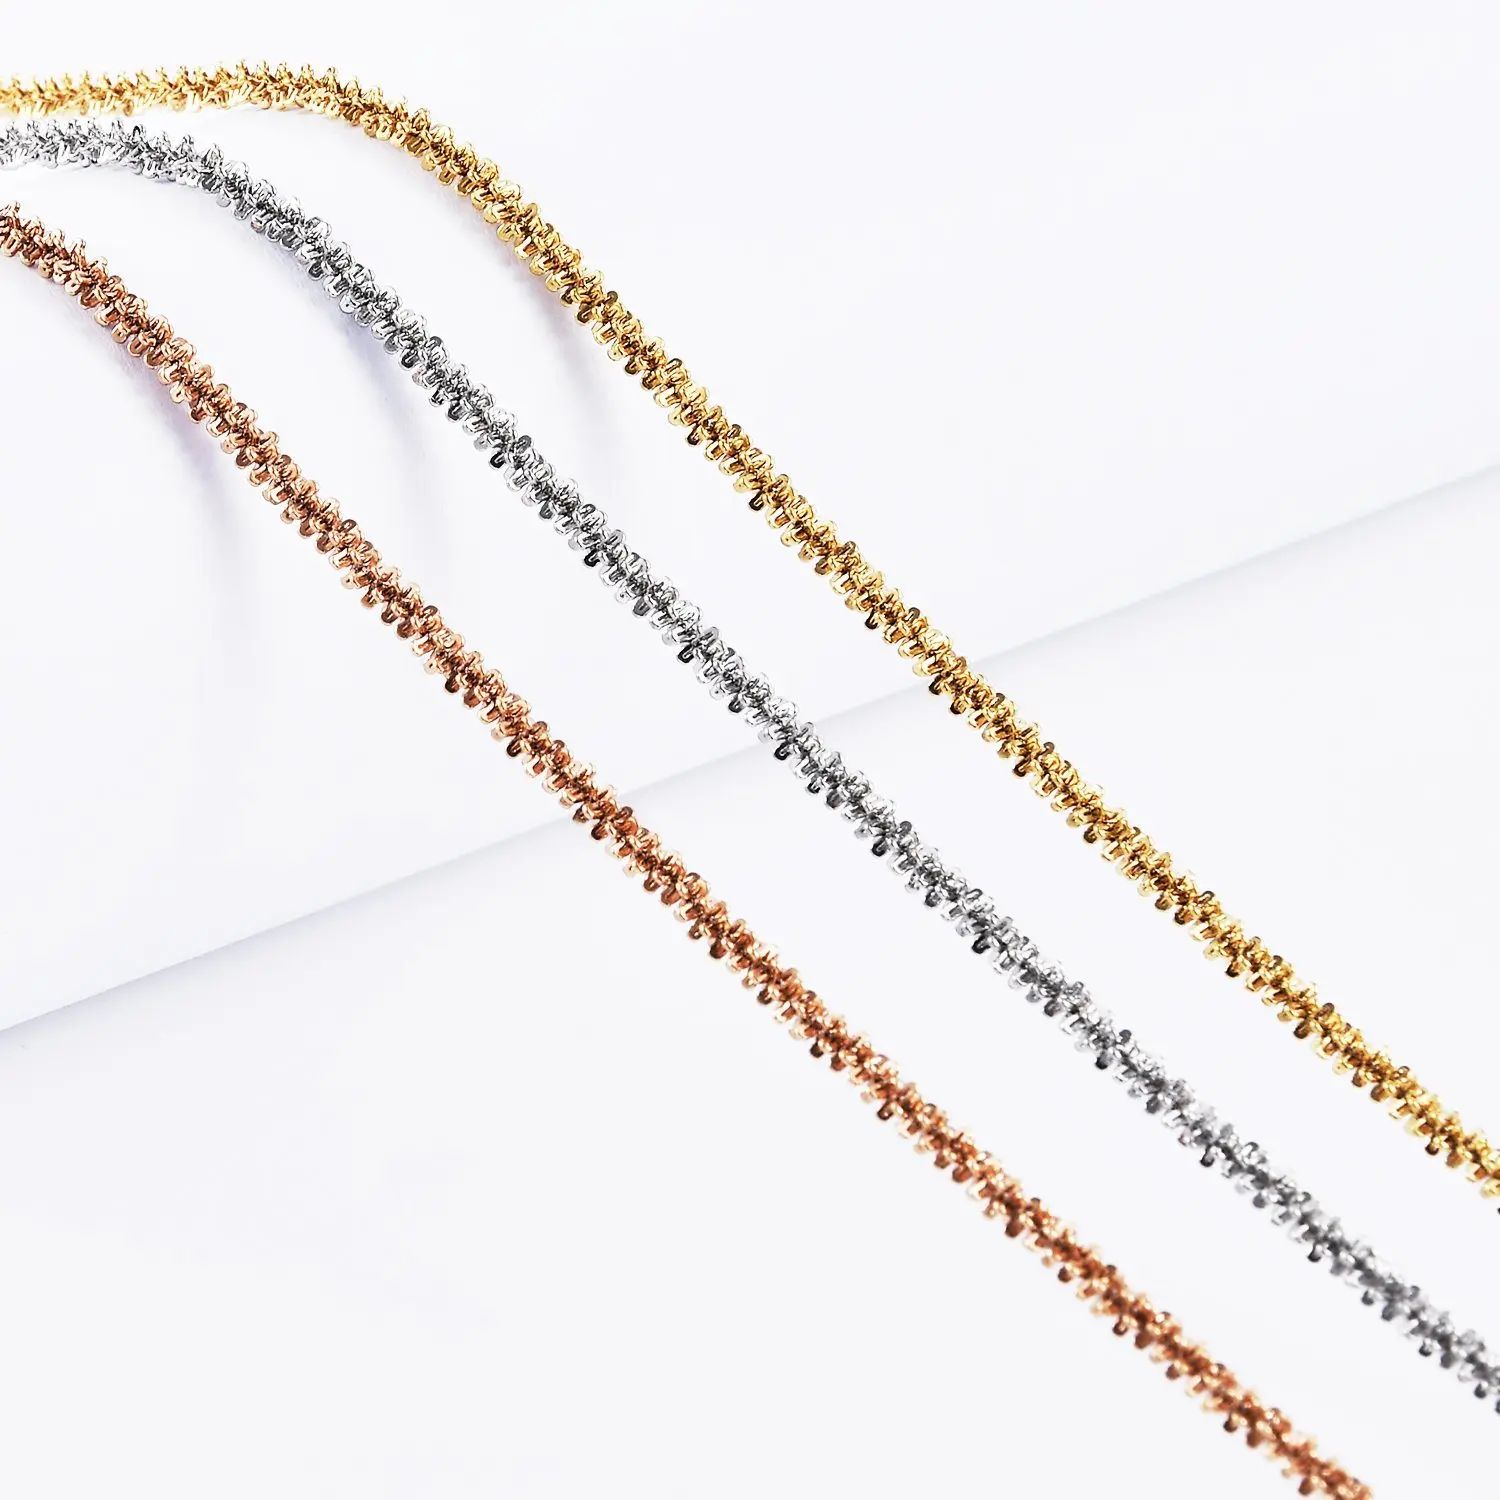 

Gold Plated Stainless Steel Necklace Silver Color Cauliflower Chain Necklace Bracelet Anklet for Jewelry Making for Men Women